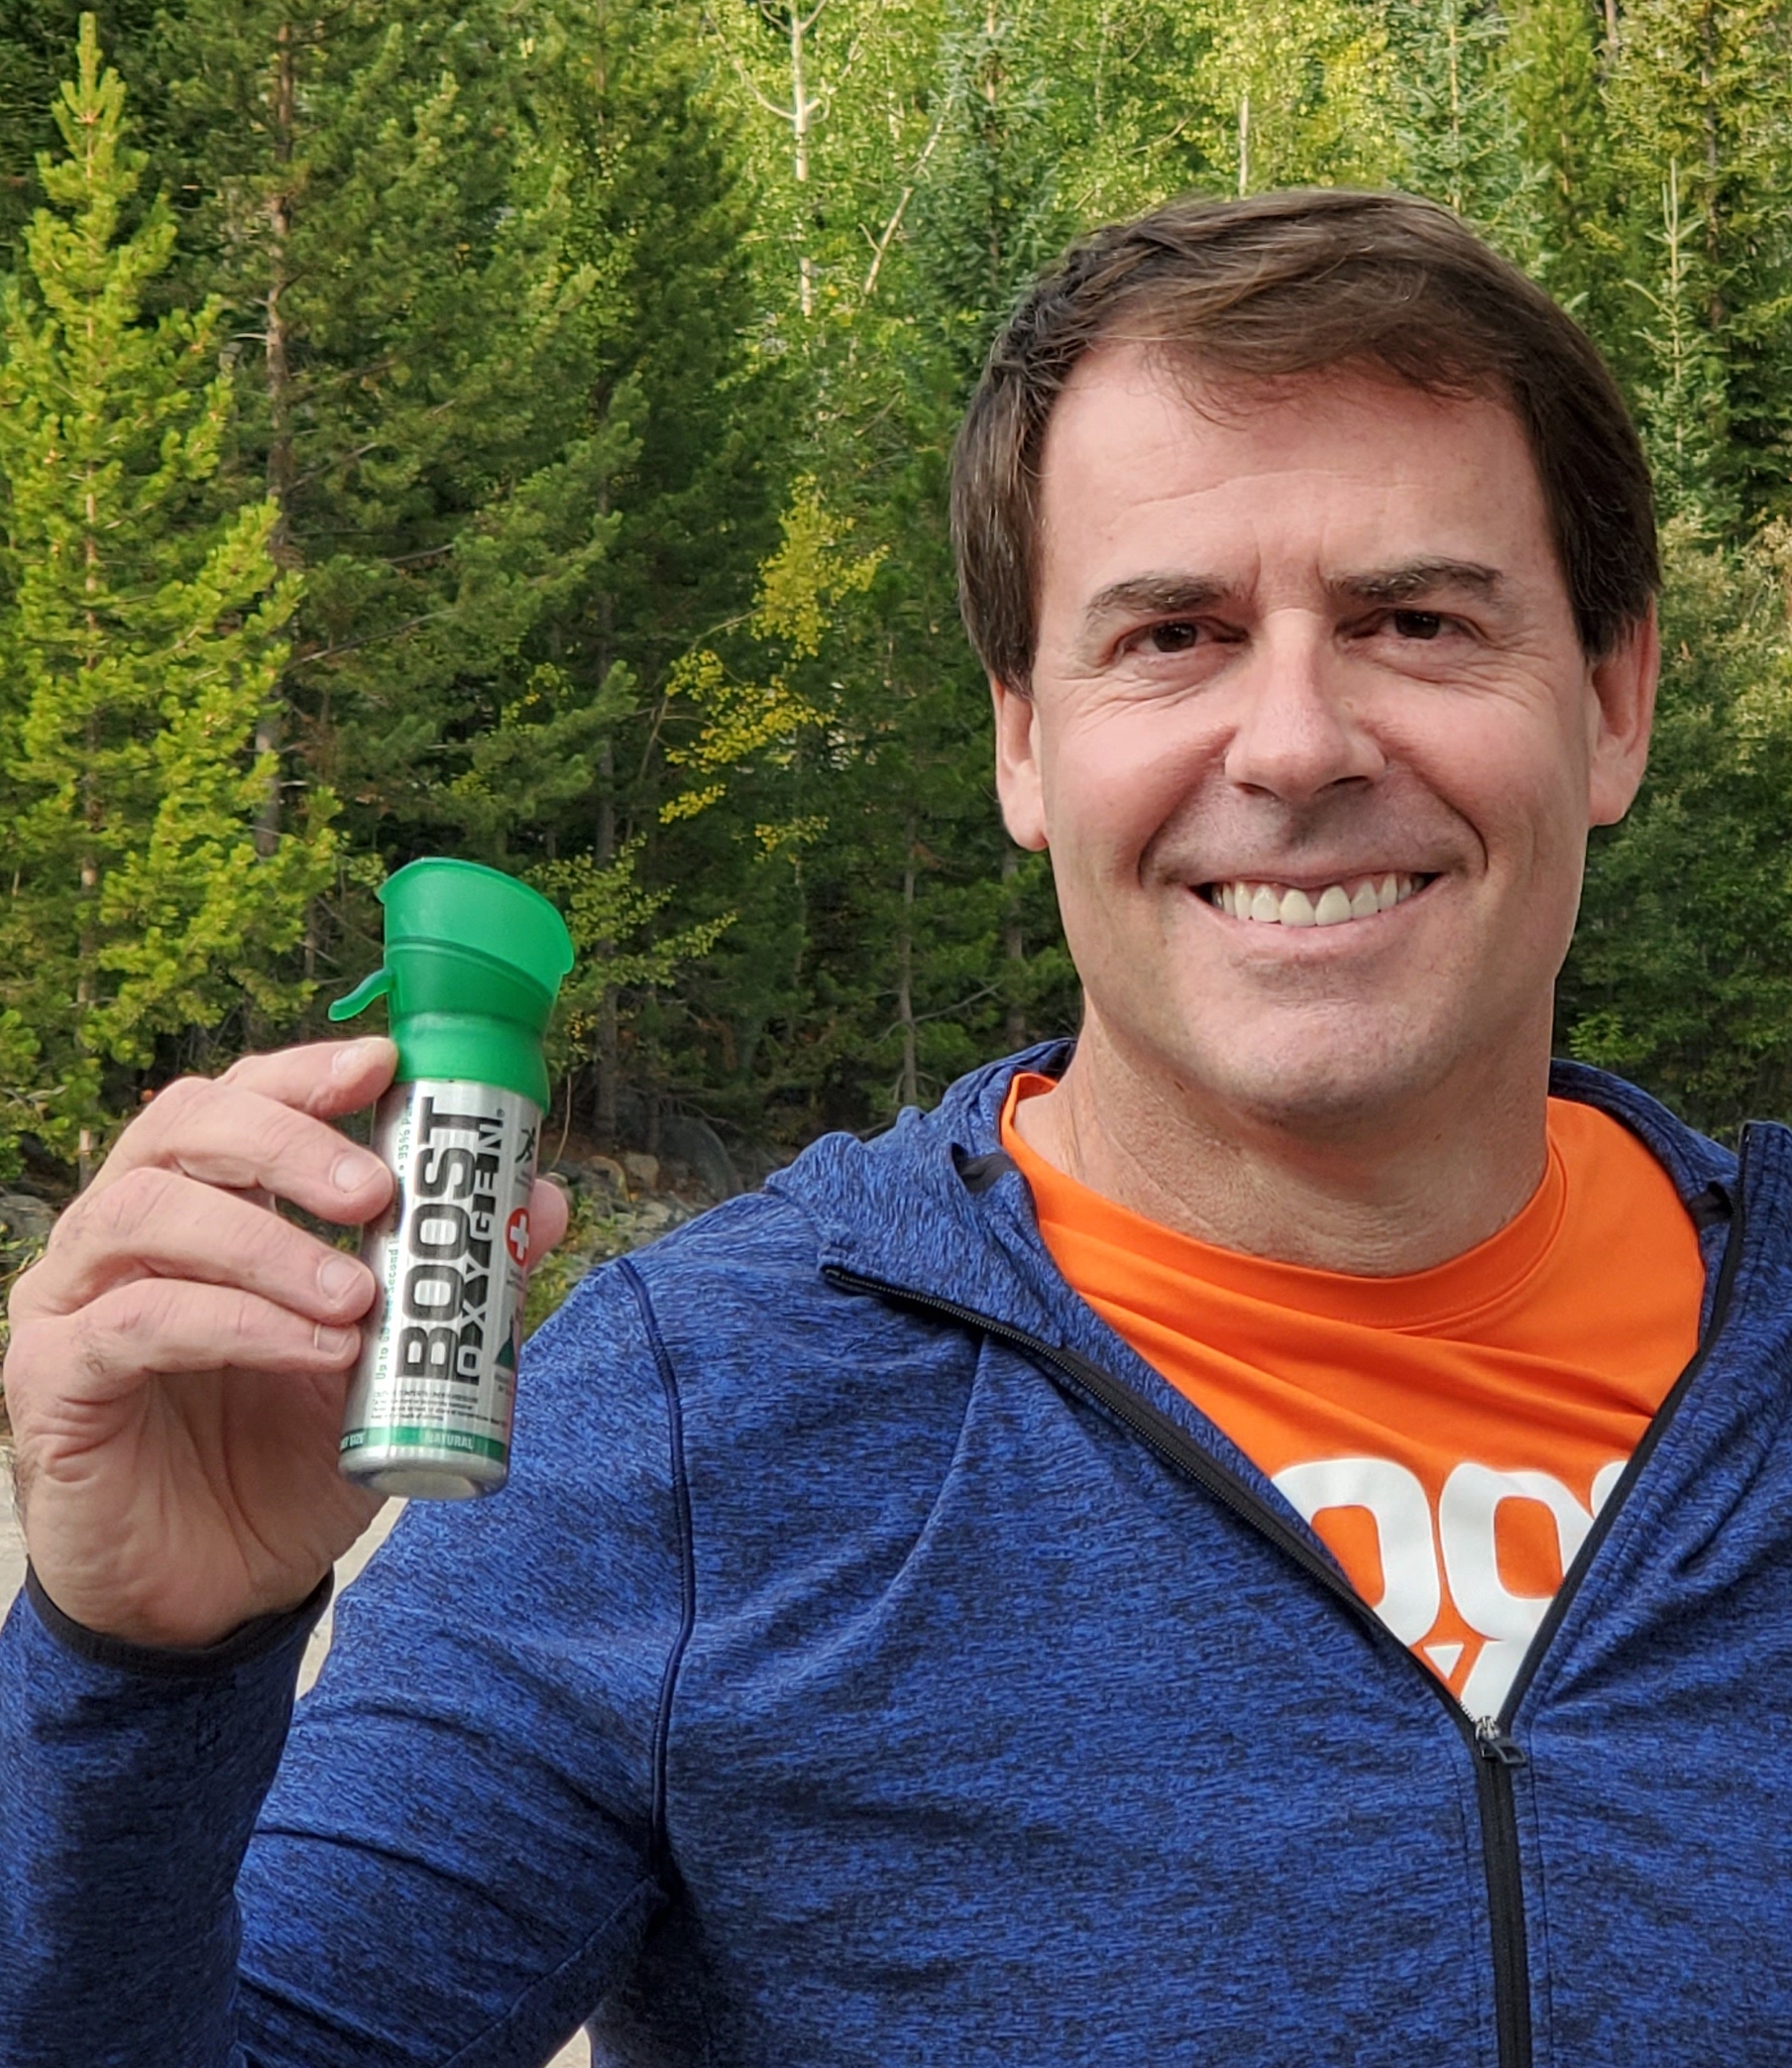 Rob Neuner, Boost Oxygen Founder and CEO